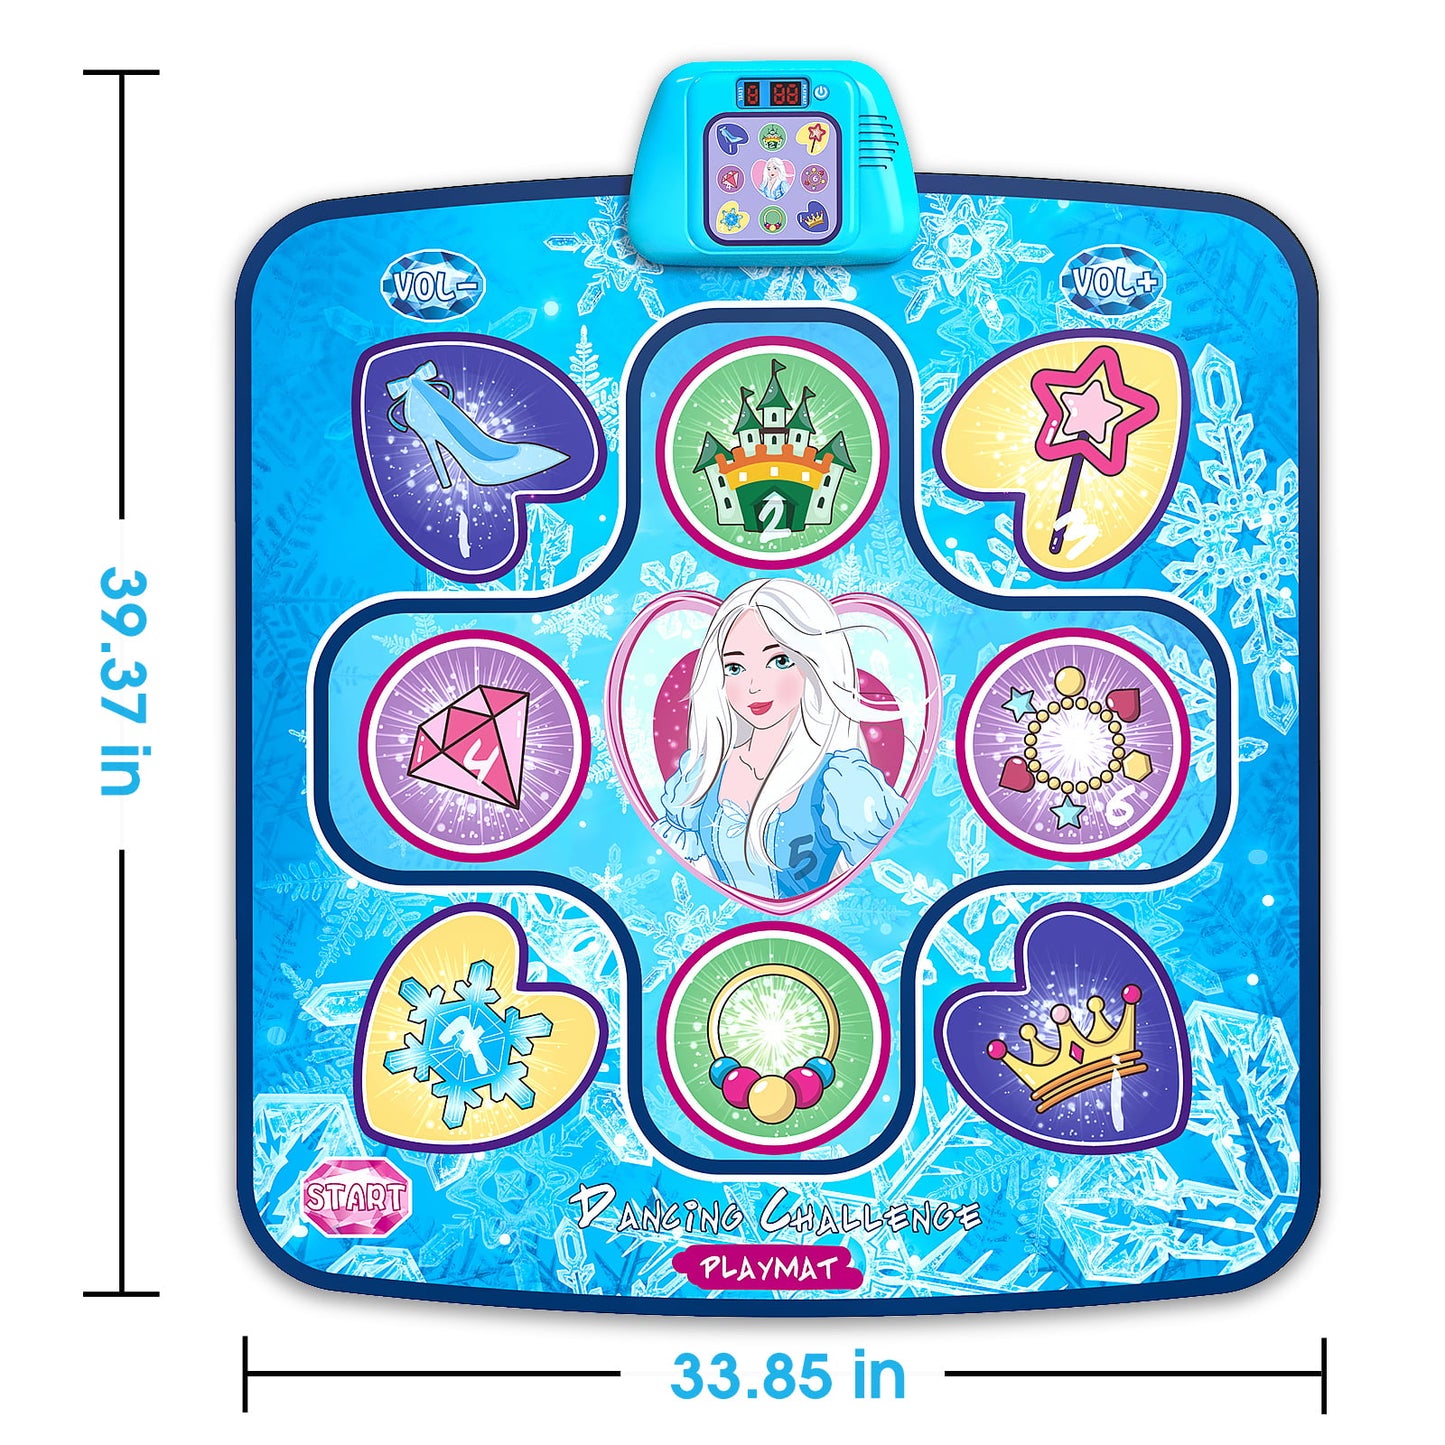 Dance Mat,Frozen Themed Dance Pad Music Games Toy for Kids Birthday Gifts for little girls 3-12 Year Old